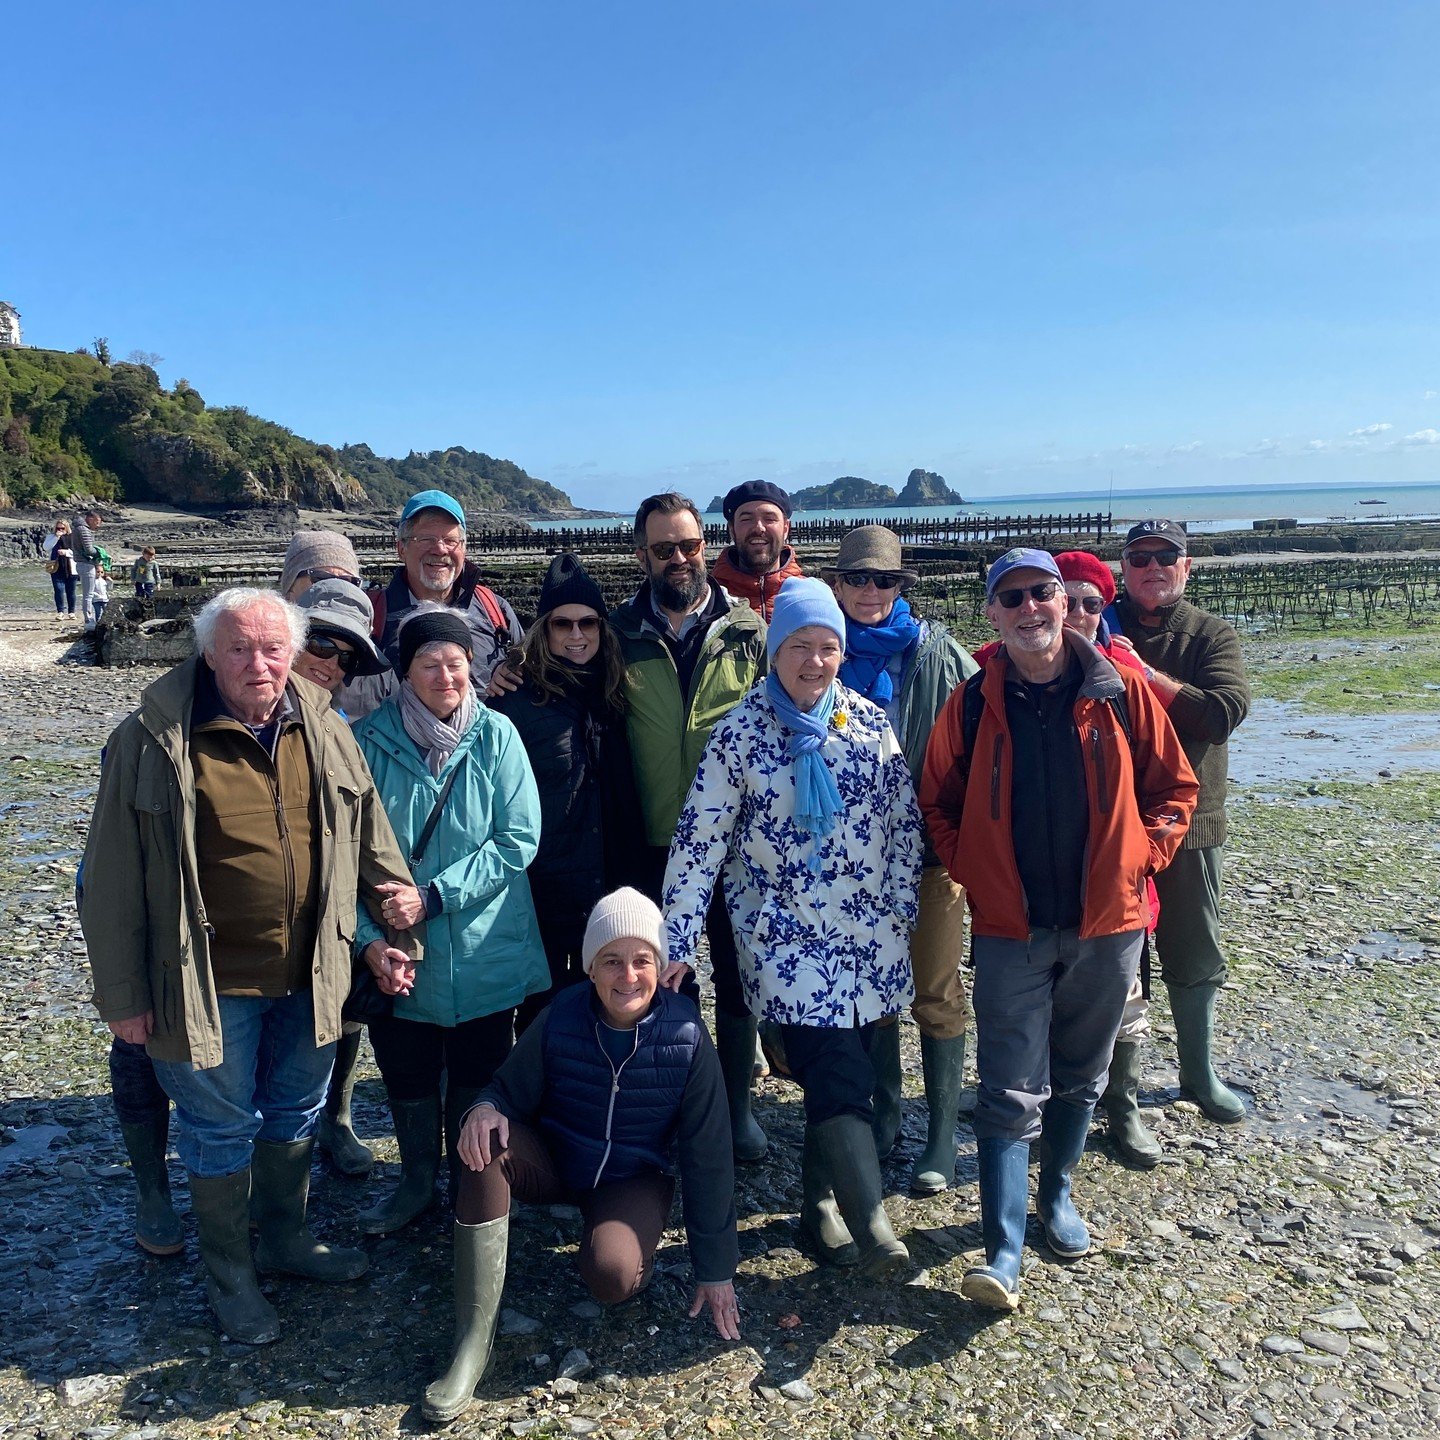 What a fun time we had! I, Simon, guided this group of adventurous and curious on a trip to my native Brittany. We were based in Saint Malo and each day delighted in tasting the local foods and meeting the wonderful people who passionately work to pr